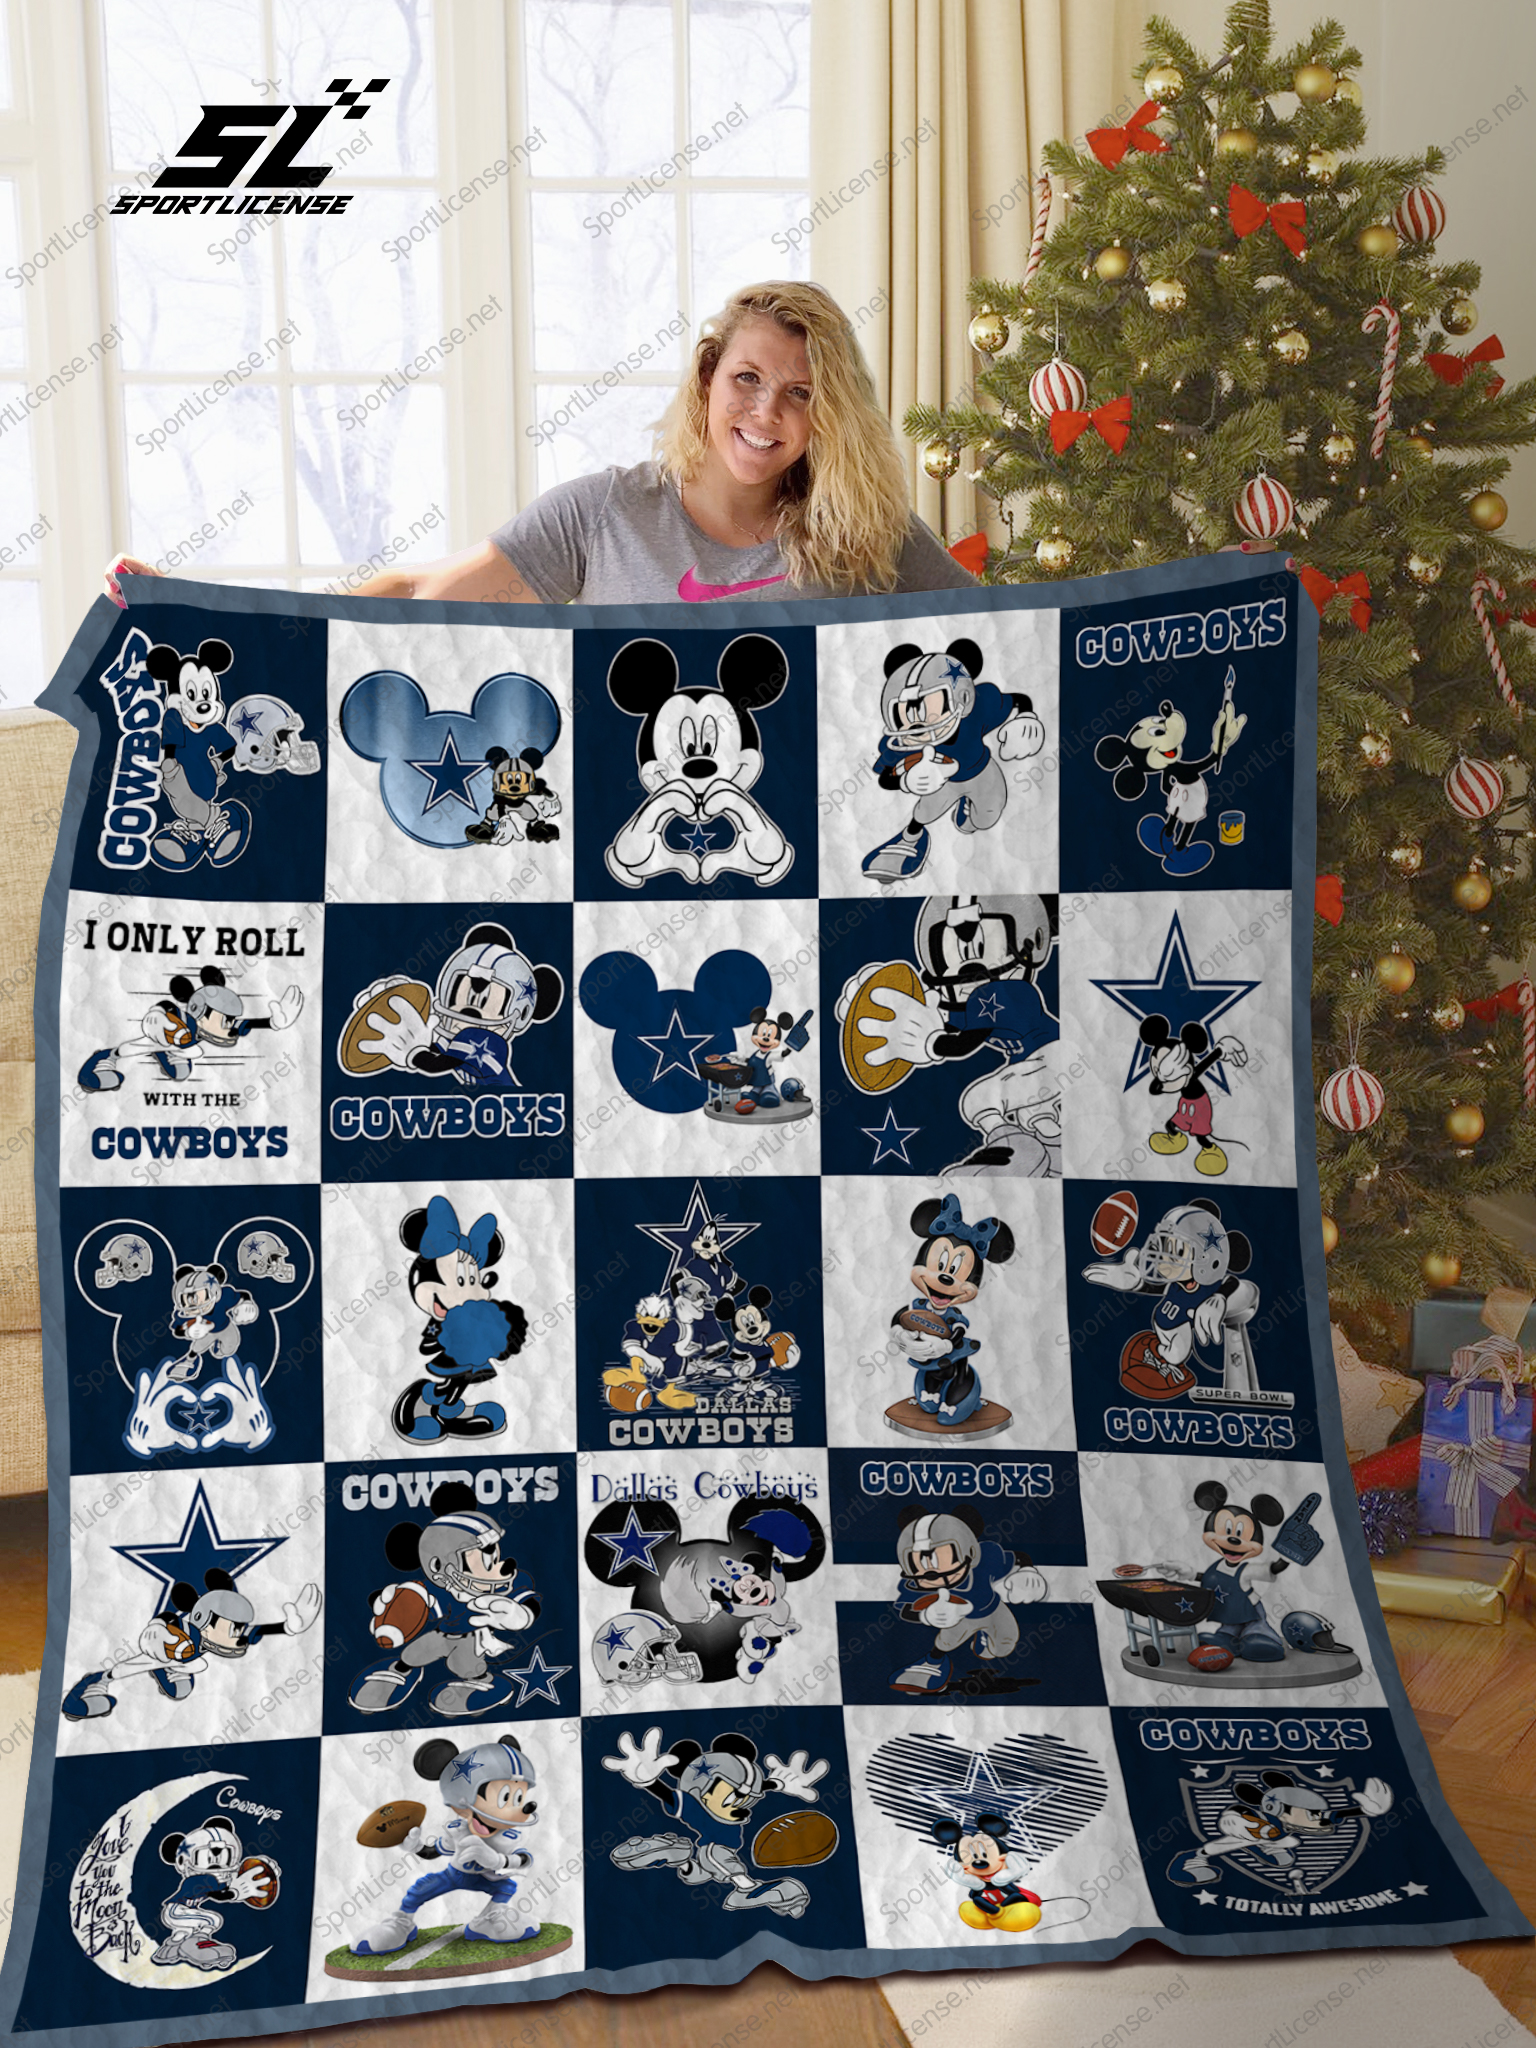 Mickey mouse dallas cowboys nfl quilt 2